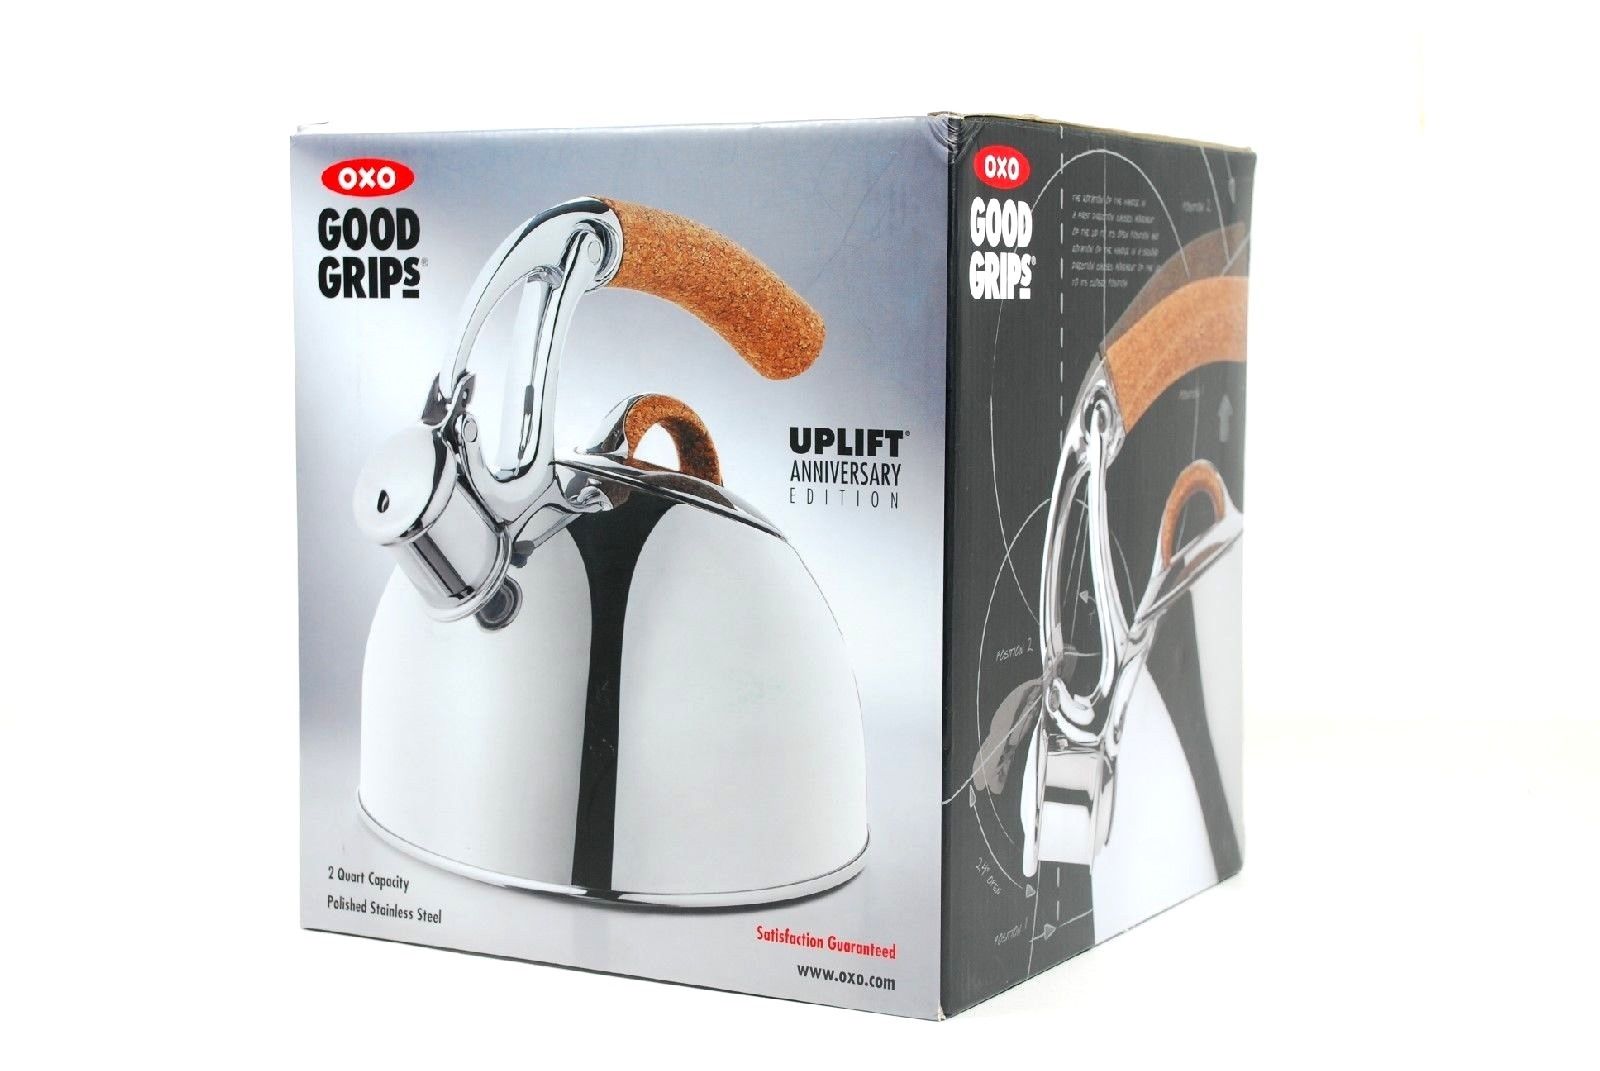 OXO Good Grips Uplift Anniversary Polished Stainless Steel Tea Kettle